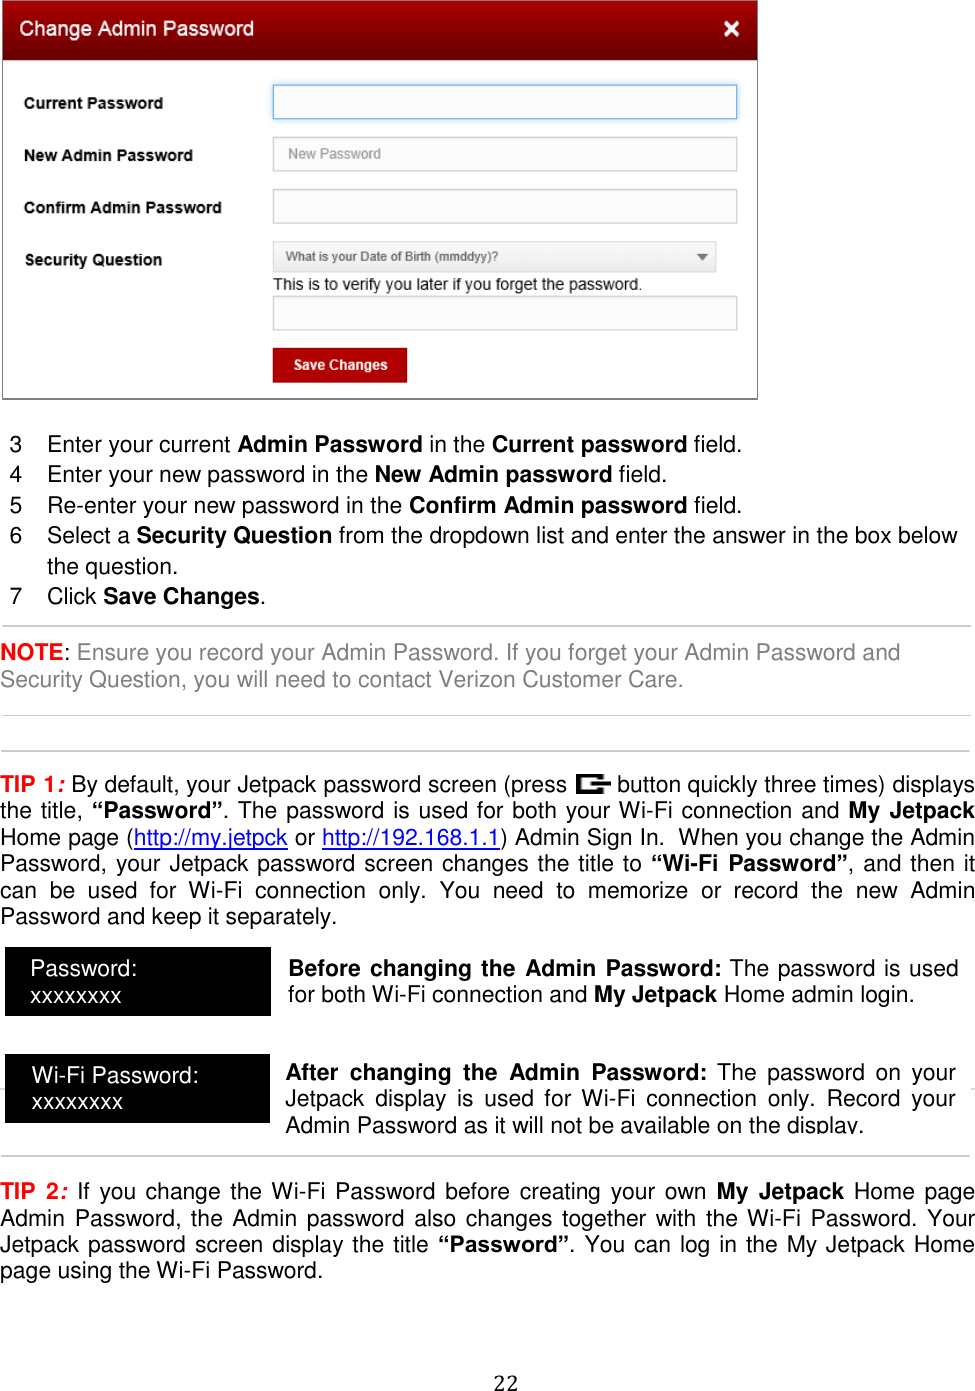   22    3  Enter your current Admin Password in the Current password field. 4  Enter your new password in the New Admin password field. 5  Re-enter your new password in the Confirm Admin password field. 6  Select a Security Question from the dropdown list and enter the answer in the box below the question. 7  Click Save Changes.  NOTE: Ensure you record your Admin Password. If you forget your Admin Password and Security Question, you will need to contact Verizon Customer Care.    TIP 1: By default, your Jetpack password screen (press   button quickly three times) displays the title, “Password”. The password is used for both your Wi-Fi connection and My Jetpack Home page (http://my.jetpck or http://192.168.1.1) Admin Sign In.  When you change the Admin Password, your Jetpack password screen changes the title to “Wi-Fi Password”, and then it can  be  used  for  Wi-Fi  connection  only.  You  need  to  memorize  or  record  the  new  Admin Password and keep it separately.          TIP  2:  If  you  change the Wi-Fi Password before creating  your own My  Jetpack  Home page Admin Password, the Admin password also changes together with the Wi-Fi Password. Your Jetpack password screen display the title “Password”. You can log in the My Jetpack Home page using the Wi-Fi Password.    Password: xxxxxxxx Wi-Fi Password: xxxxxxxx Before changing the Admin Password: The password is used for both Wi-Fi connection and My Jetpack Home admin login.  After  changing  the  Admin  Password:  The  password  on  your Jetpack  display  is  used  for  Wi-Fi  connection  only.  Record  your Admin Password as it will not be available on the display.  